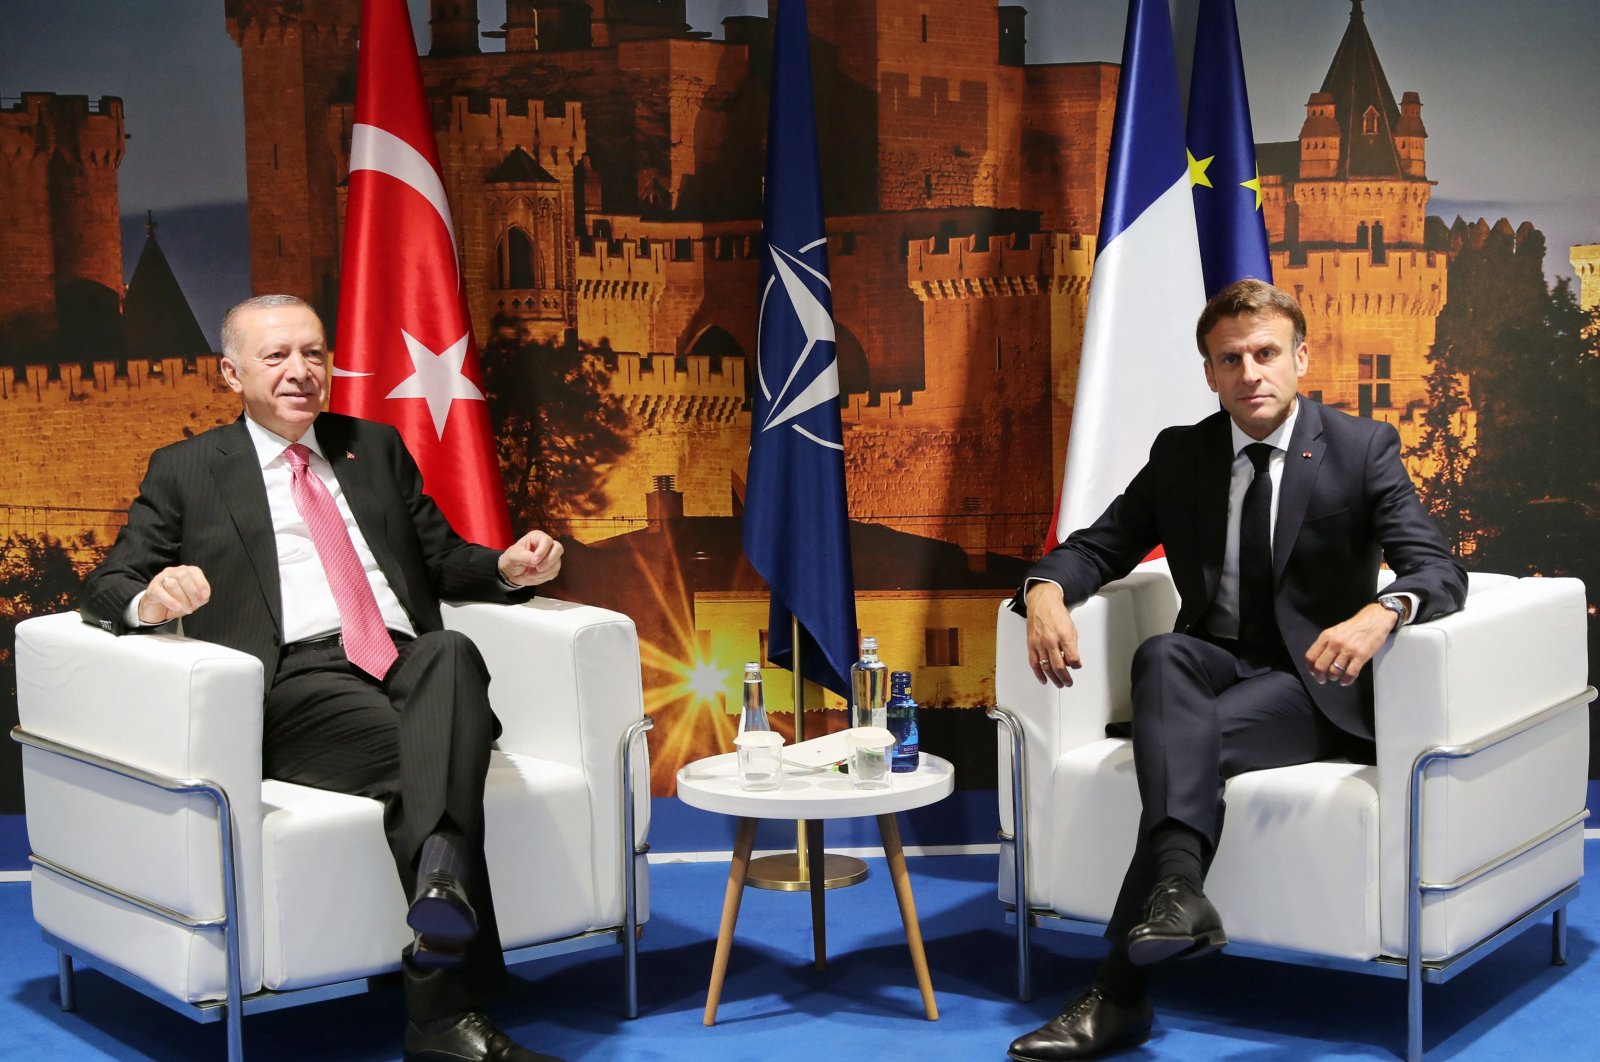 President Recep Tayyip Erdoğan (L) and French President Emmanuel Macron pose for a photo during their bilateral meeting as part of the NATO summit at the Ifema congress center in Madrid, Spain, June 29, 2022. (AFP Photo)